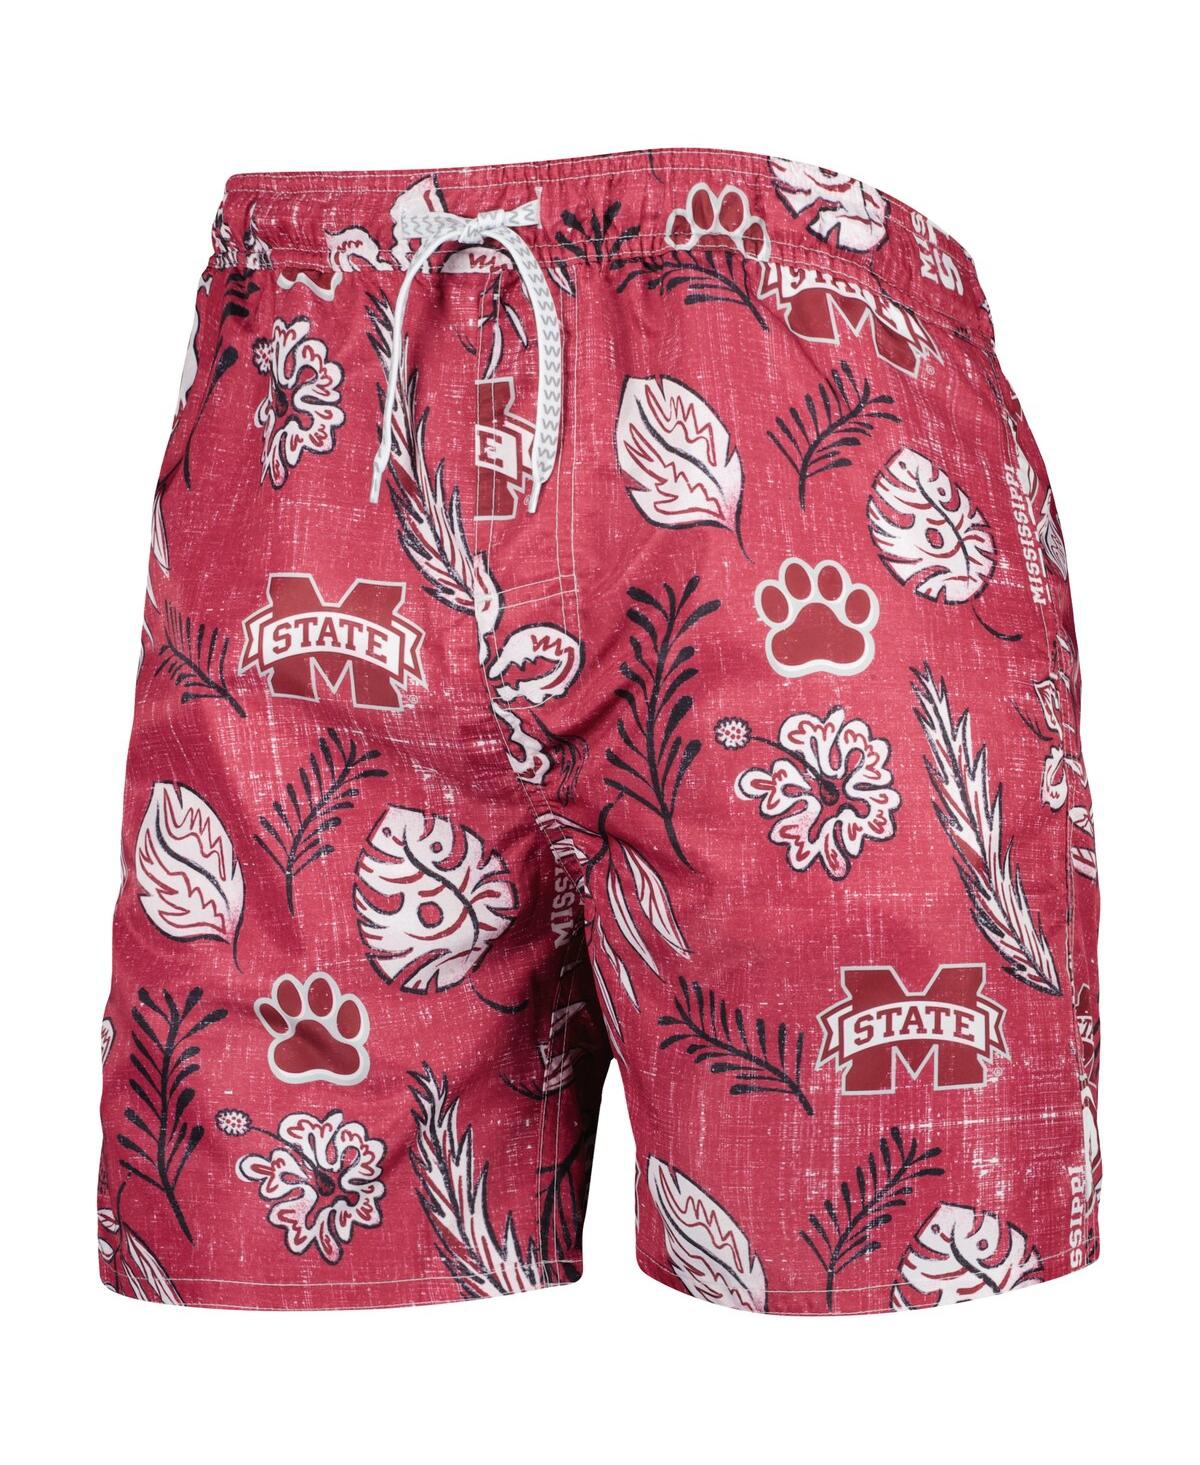 Shop Wes & Willy Men's  Maroon Mississippi State Bulldogs Vintage-like Floral Swim Trunks